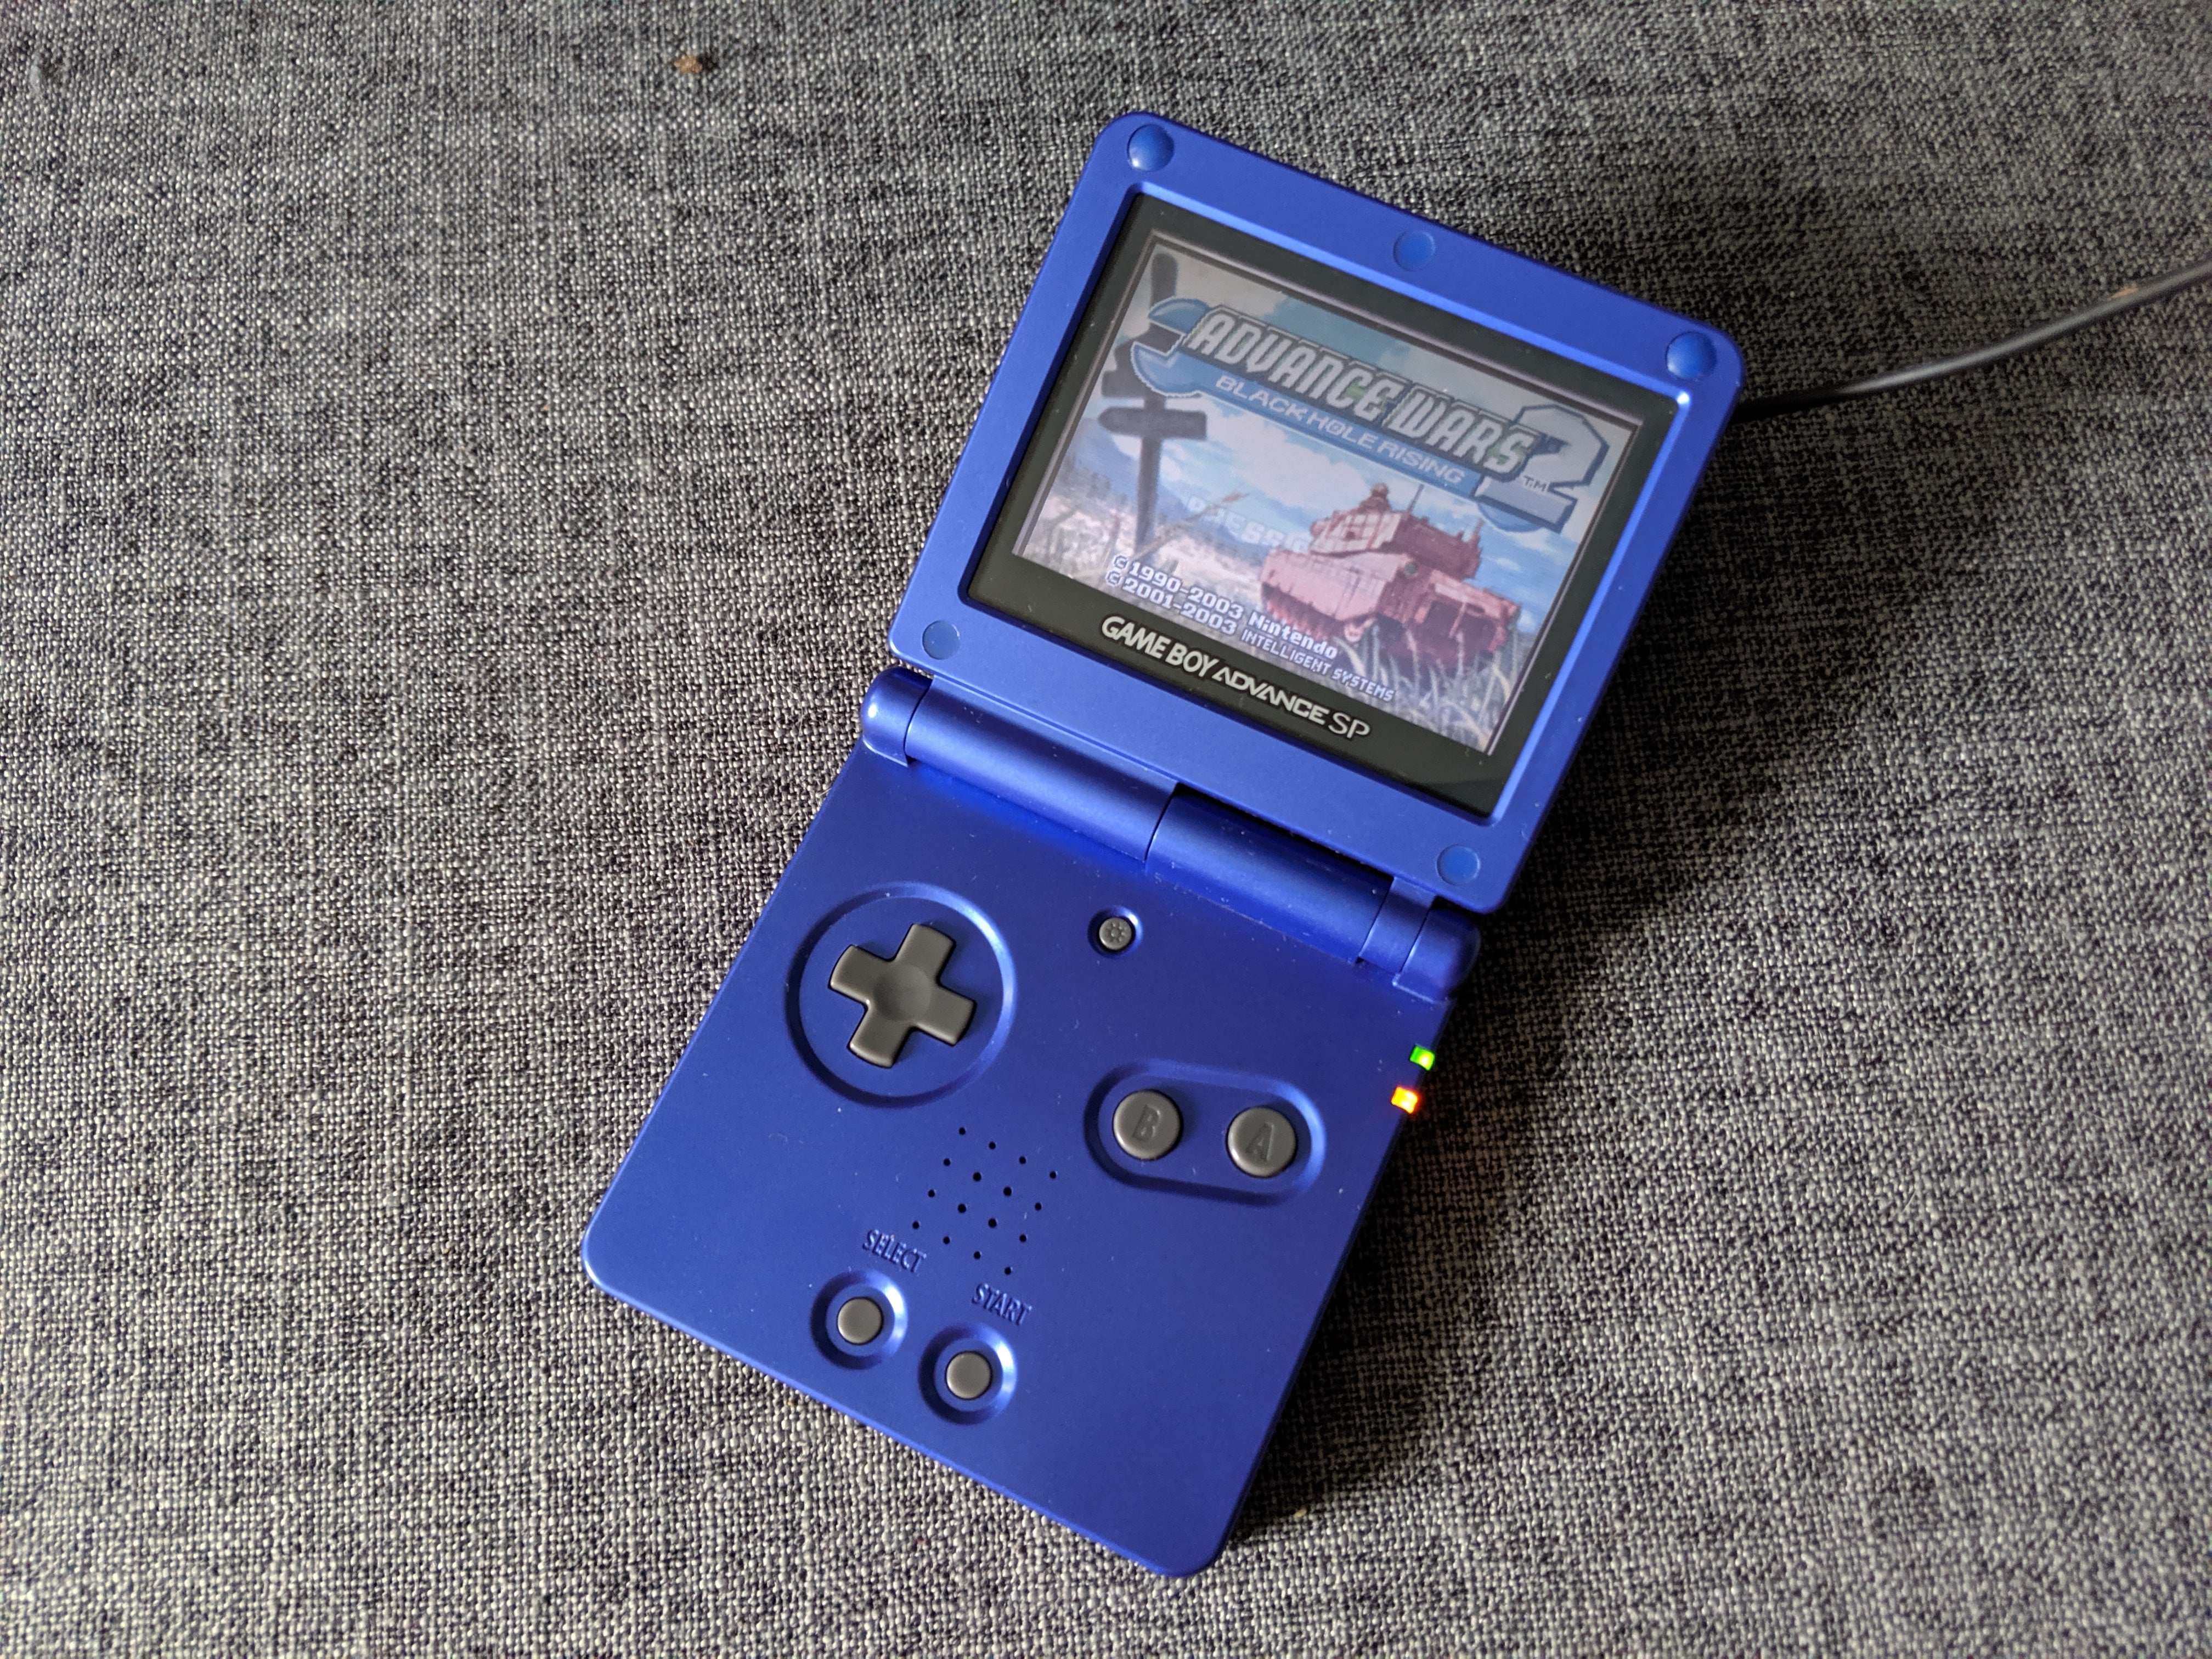 can a gameboy advance sp play gameboy games